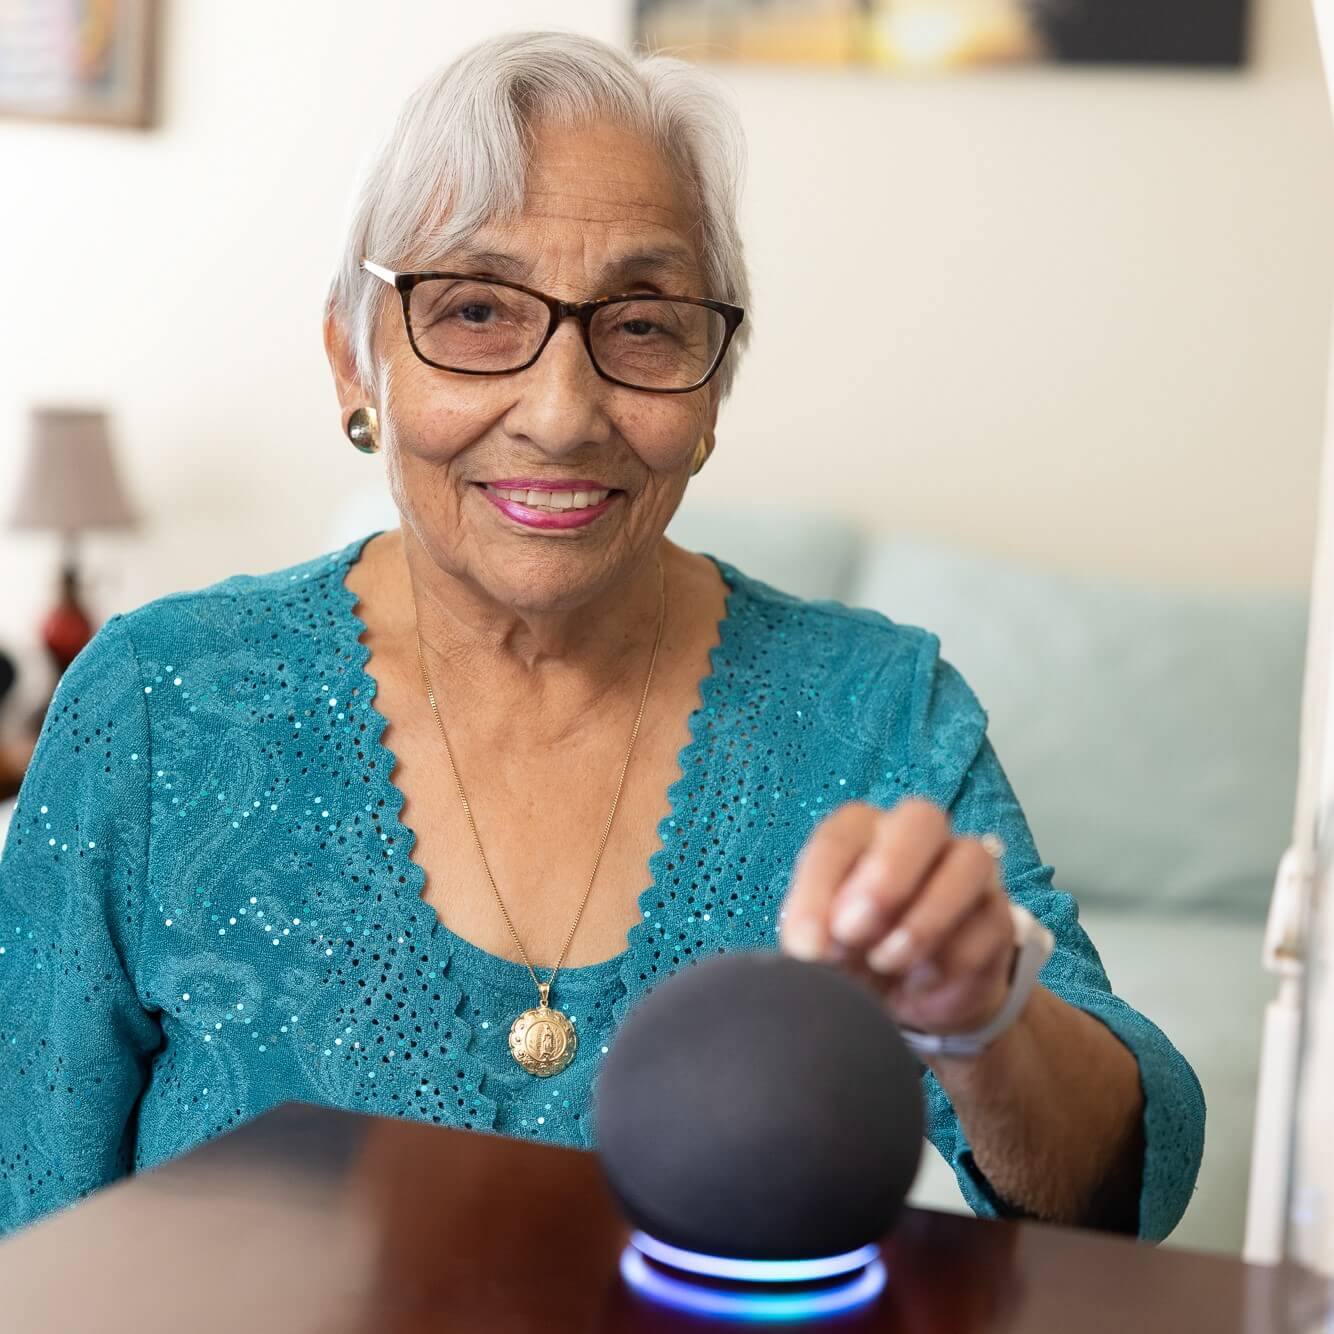 Carlton Senior Living Innovates By Equipping All Residents with Amazon Alexas